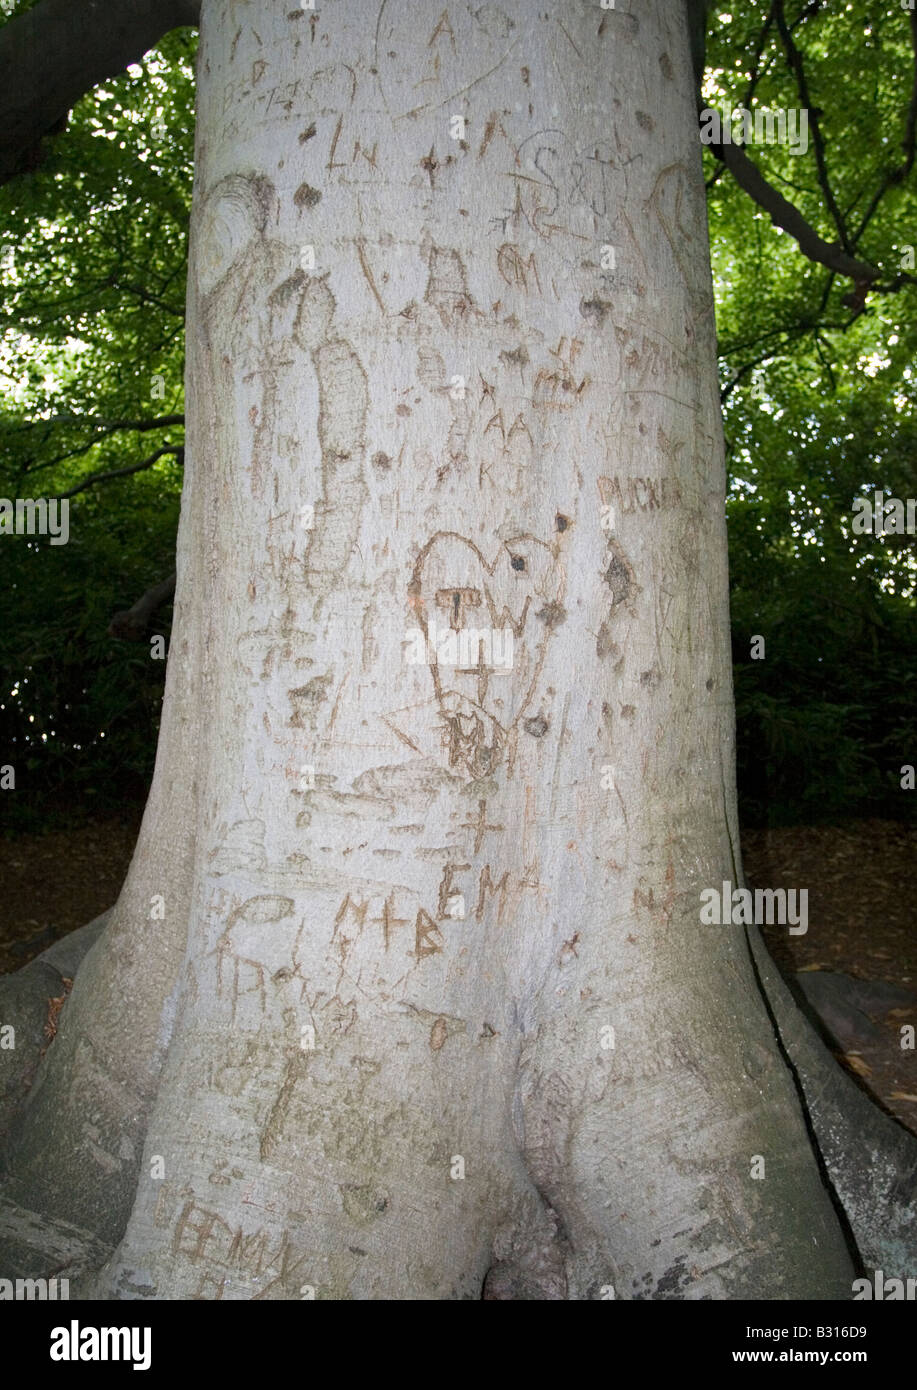 Initials carved on a Tree in the forest Stock Photo